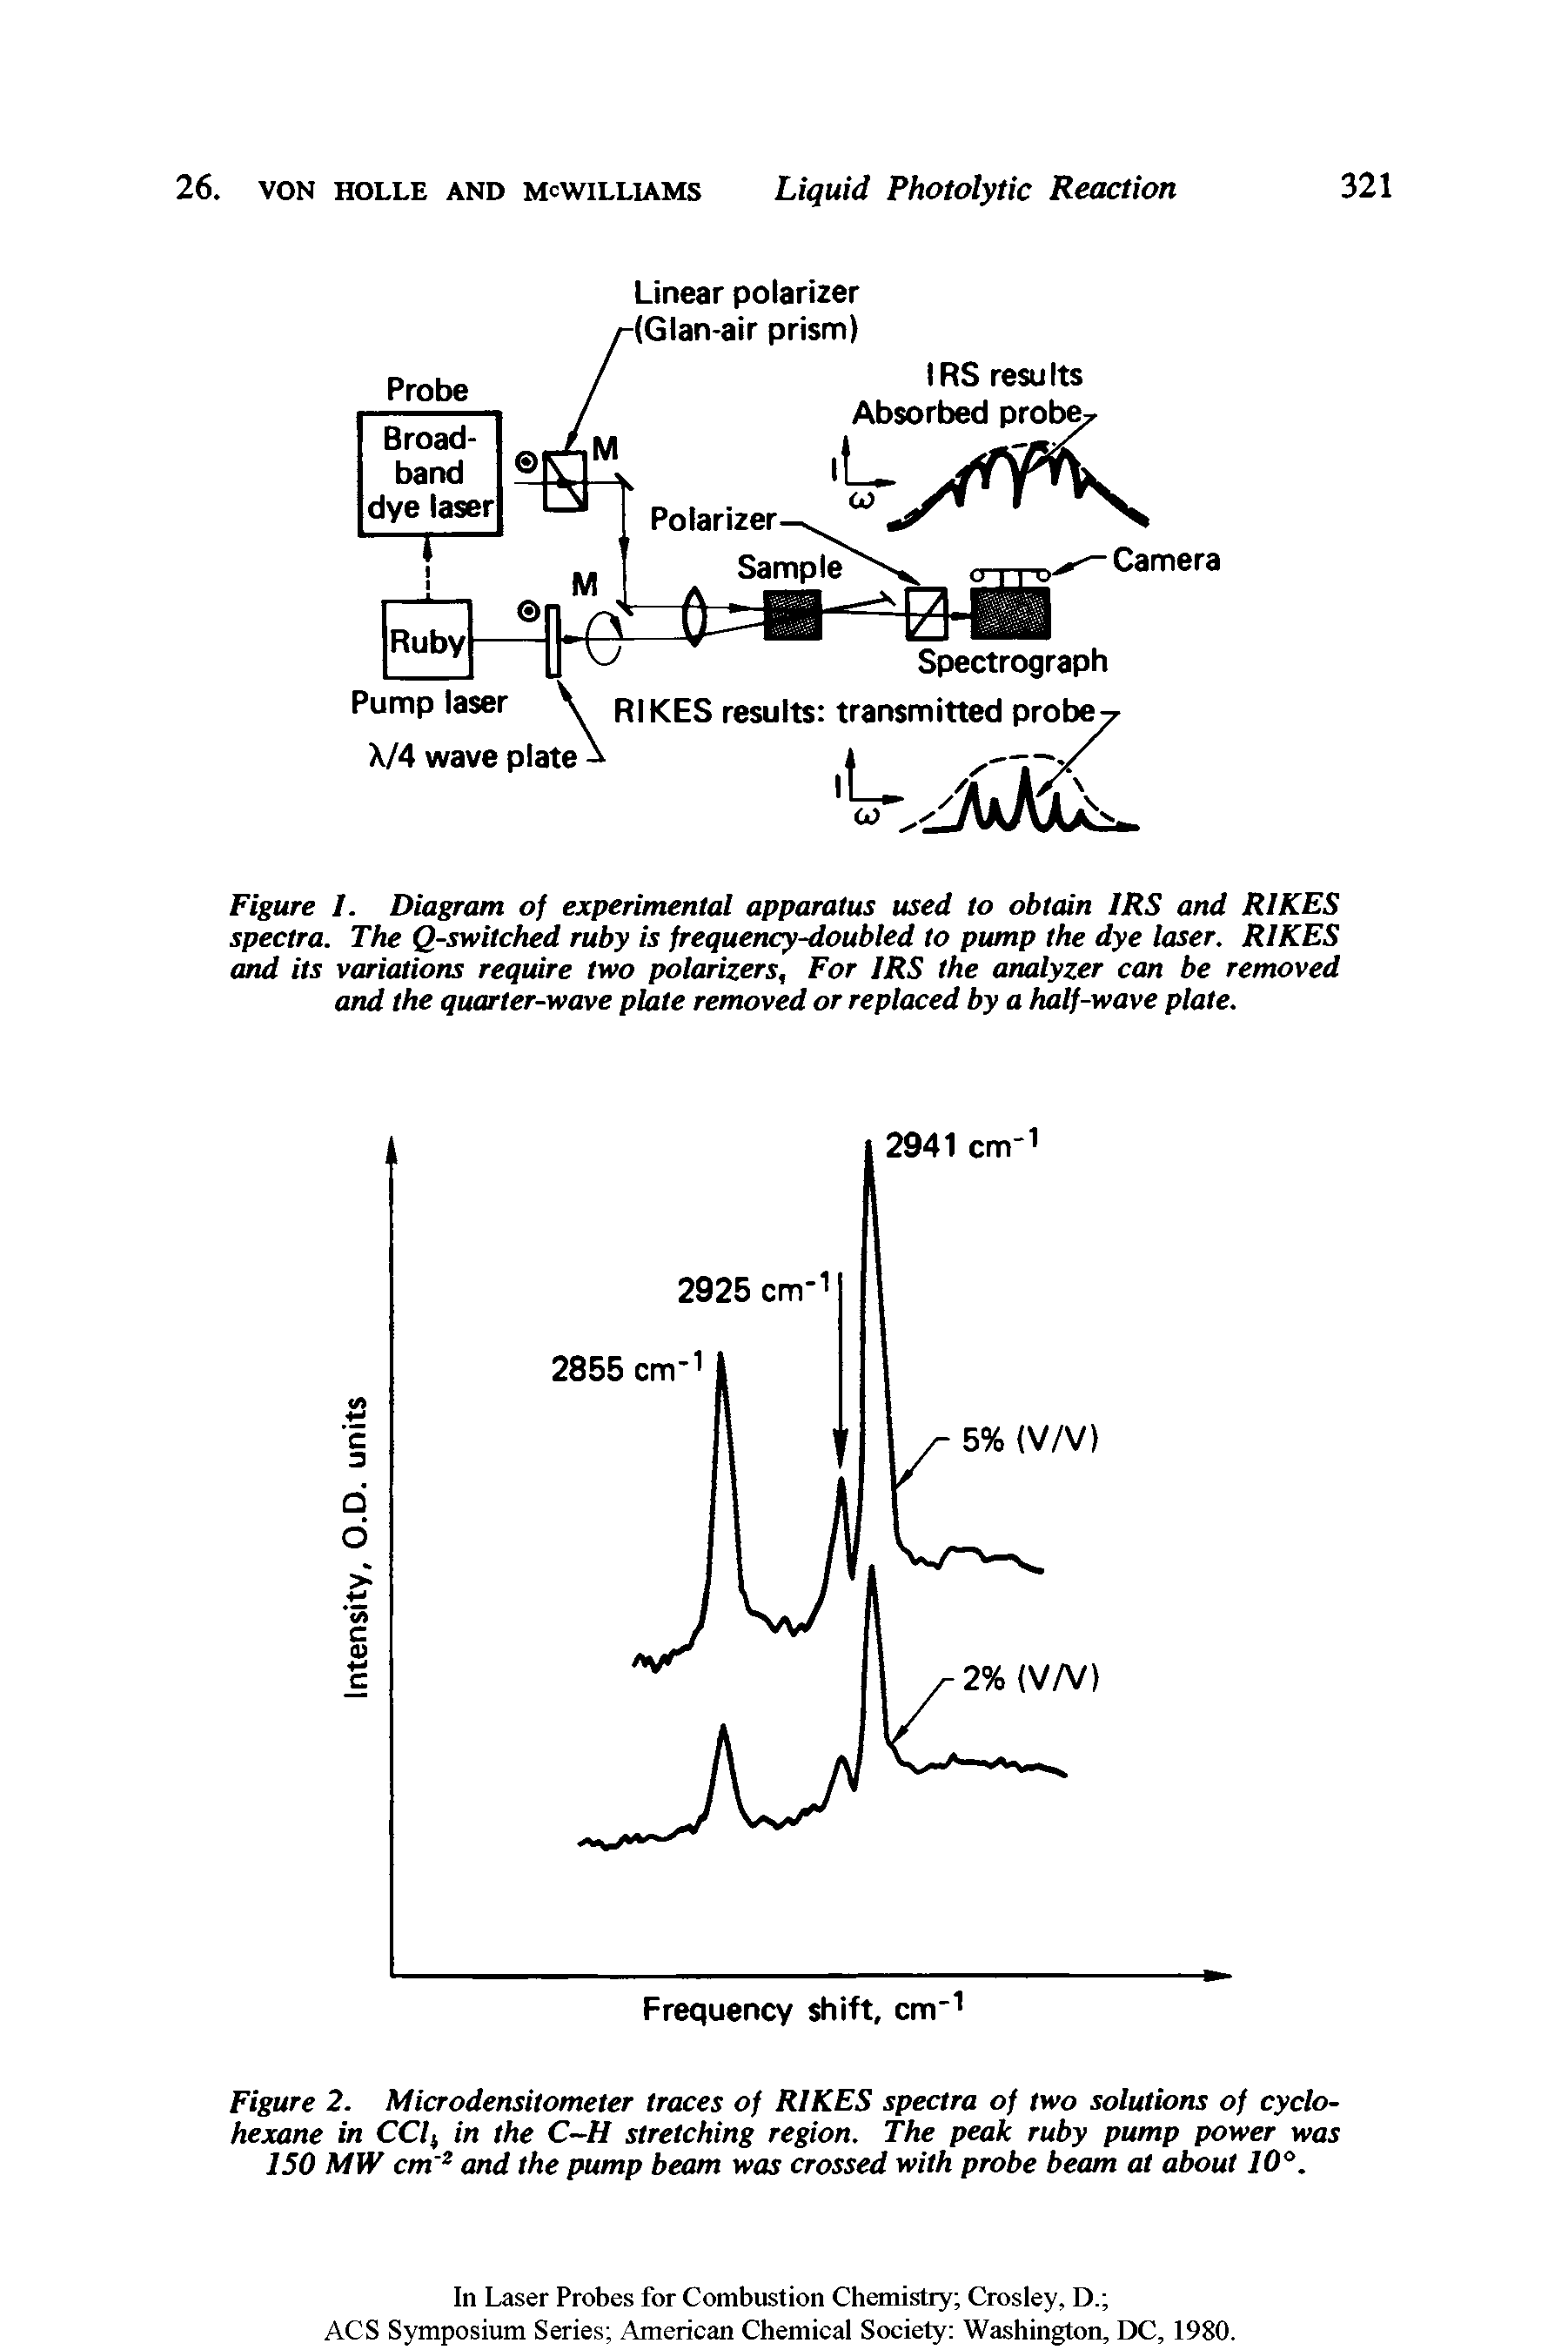 Figure 2. Microdensitometer traces of RIKES spectra of two solutions of cyclohexane in CClt in the C-H stretching region. The peak ruby pump power was ISO MW cm 2 and the pump beam was crossed with probe beam at about 10°.